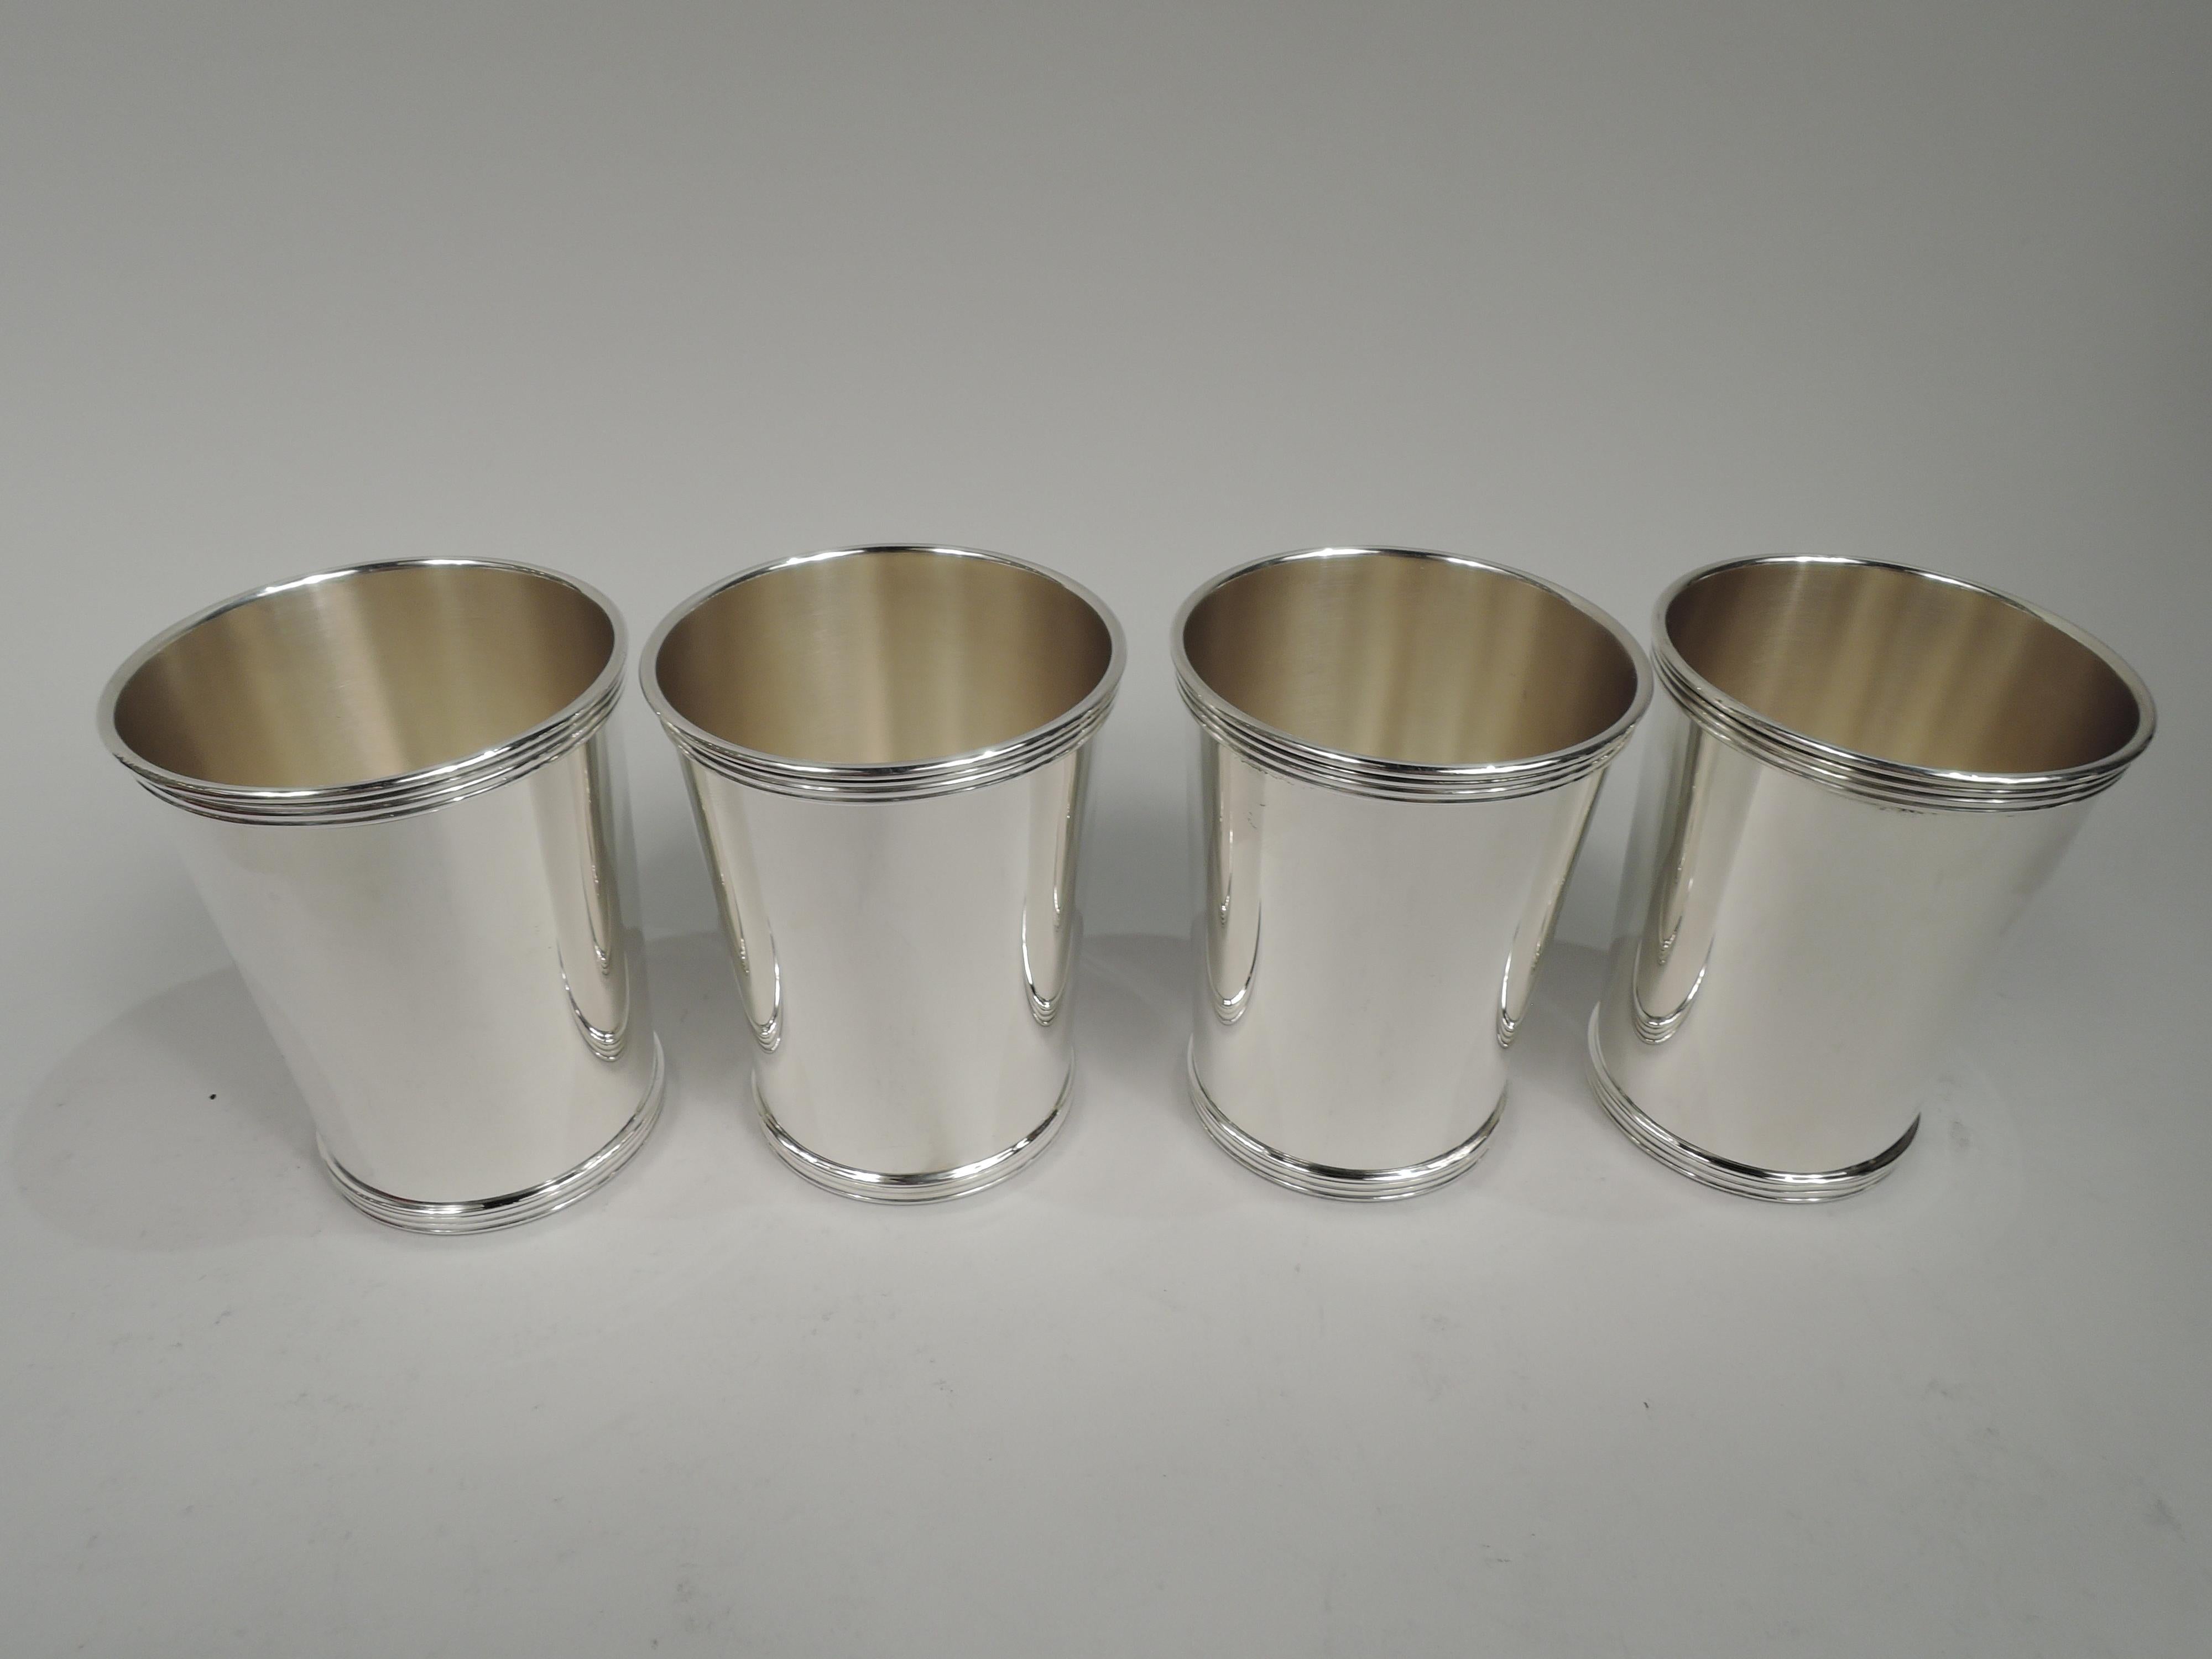 Set of 4 sterling silver mint julep cups. Retailed by Cartier in New York. Each: Traditional form with straight and tapering sides and reeded rim and base. In red leather-bound case with fitted velvet. Cover interior has gilt retailer’s stamp. Cups